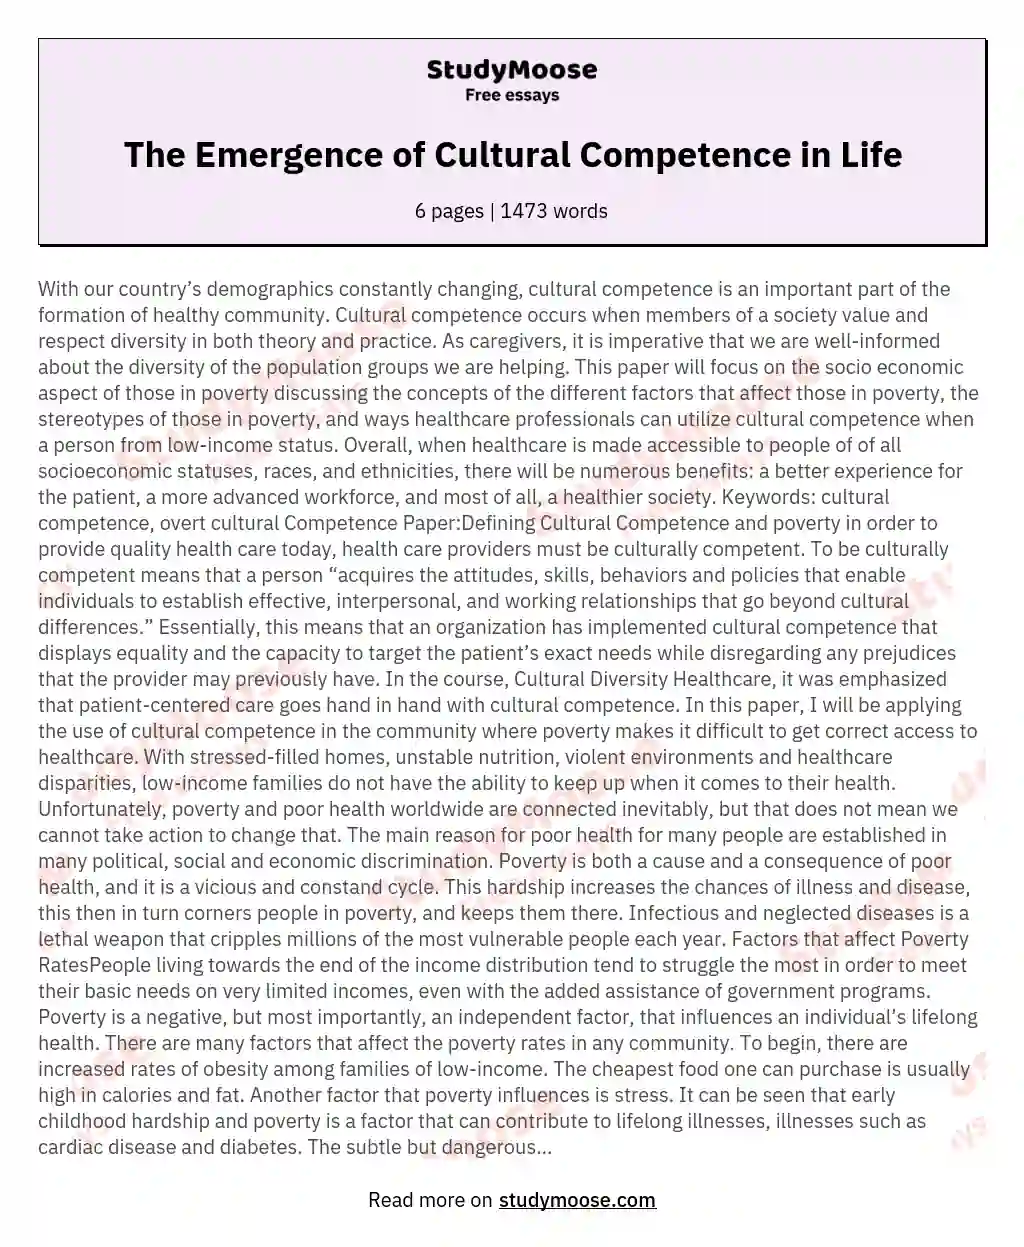 The Emergence of Cultural Competence in Life essay